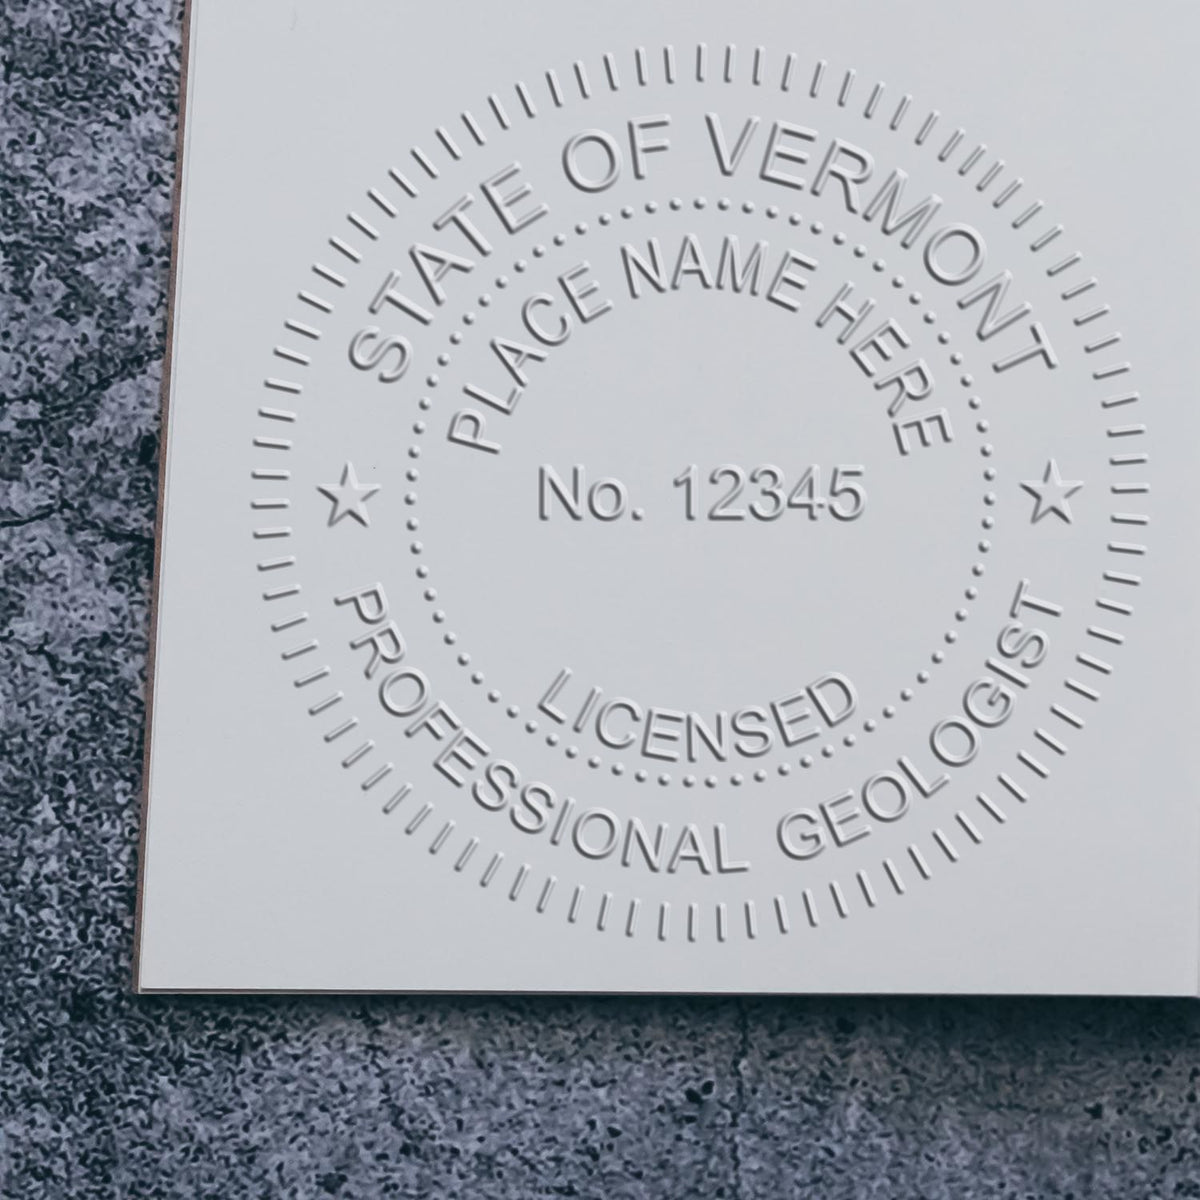 An in use photo of the Soft Vermont Professional Geologist Seal showing a sample imprint on a cardstock